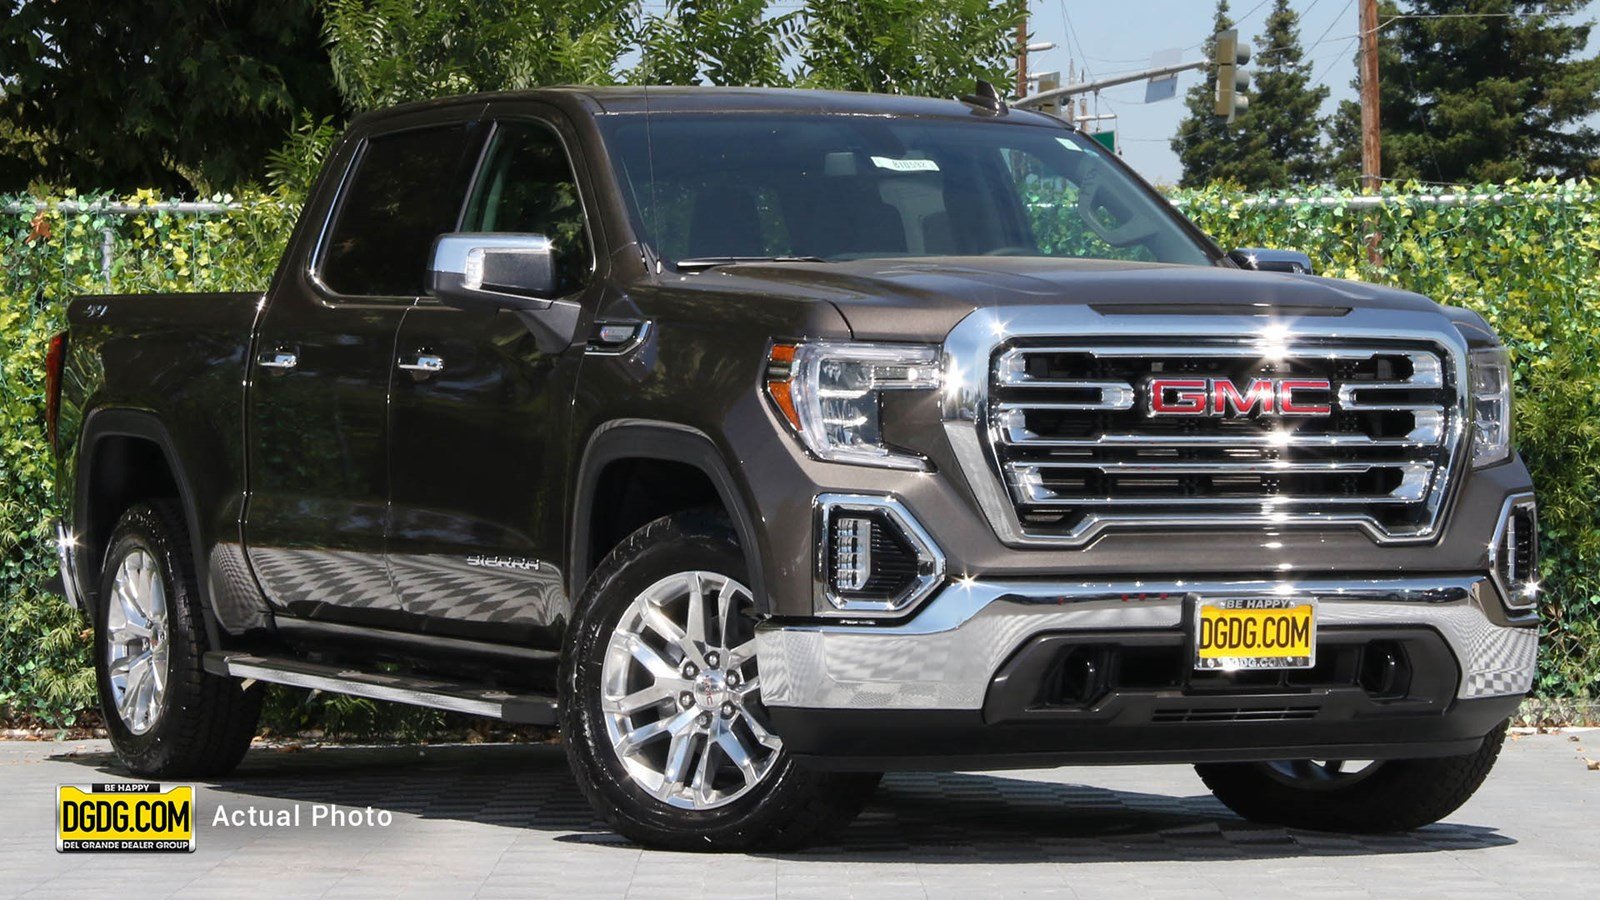 The Top 5 New Features on the 2019 GMC Sierra Pickup ...